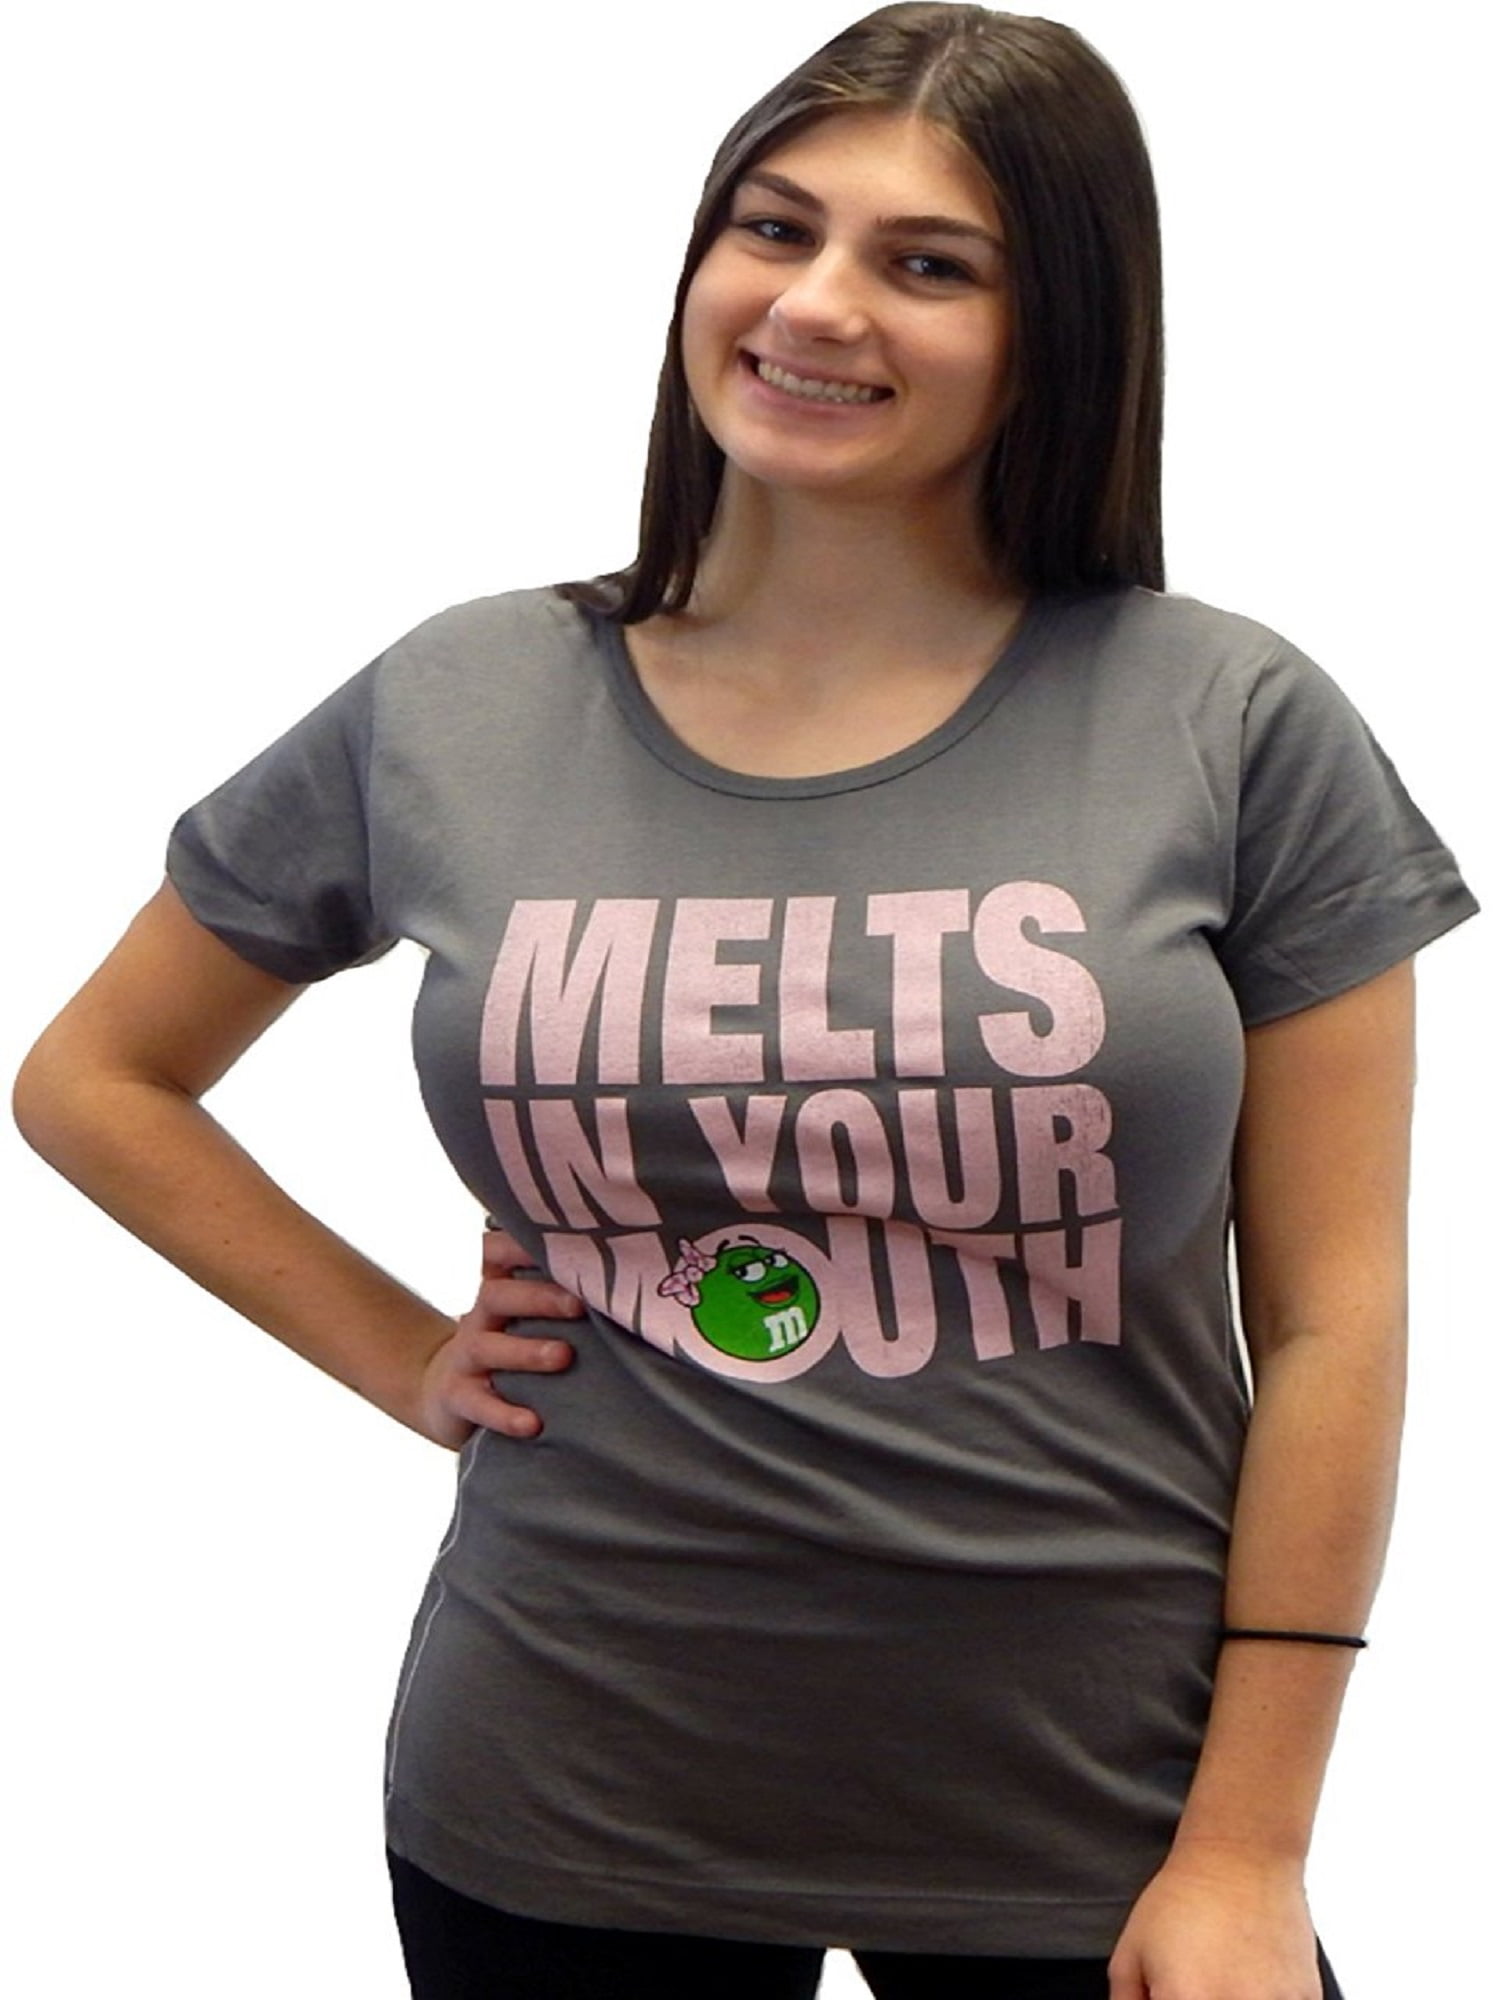 M & M Pink Chocolate Melts In Your Mouth Cotton T-Shirt Adult Size XL